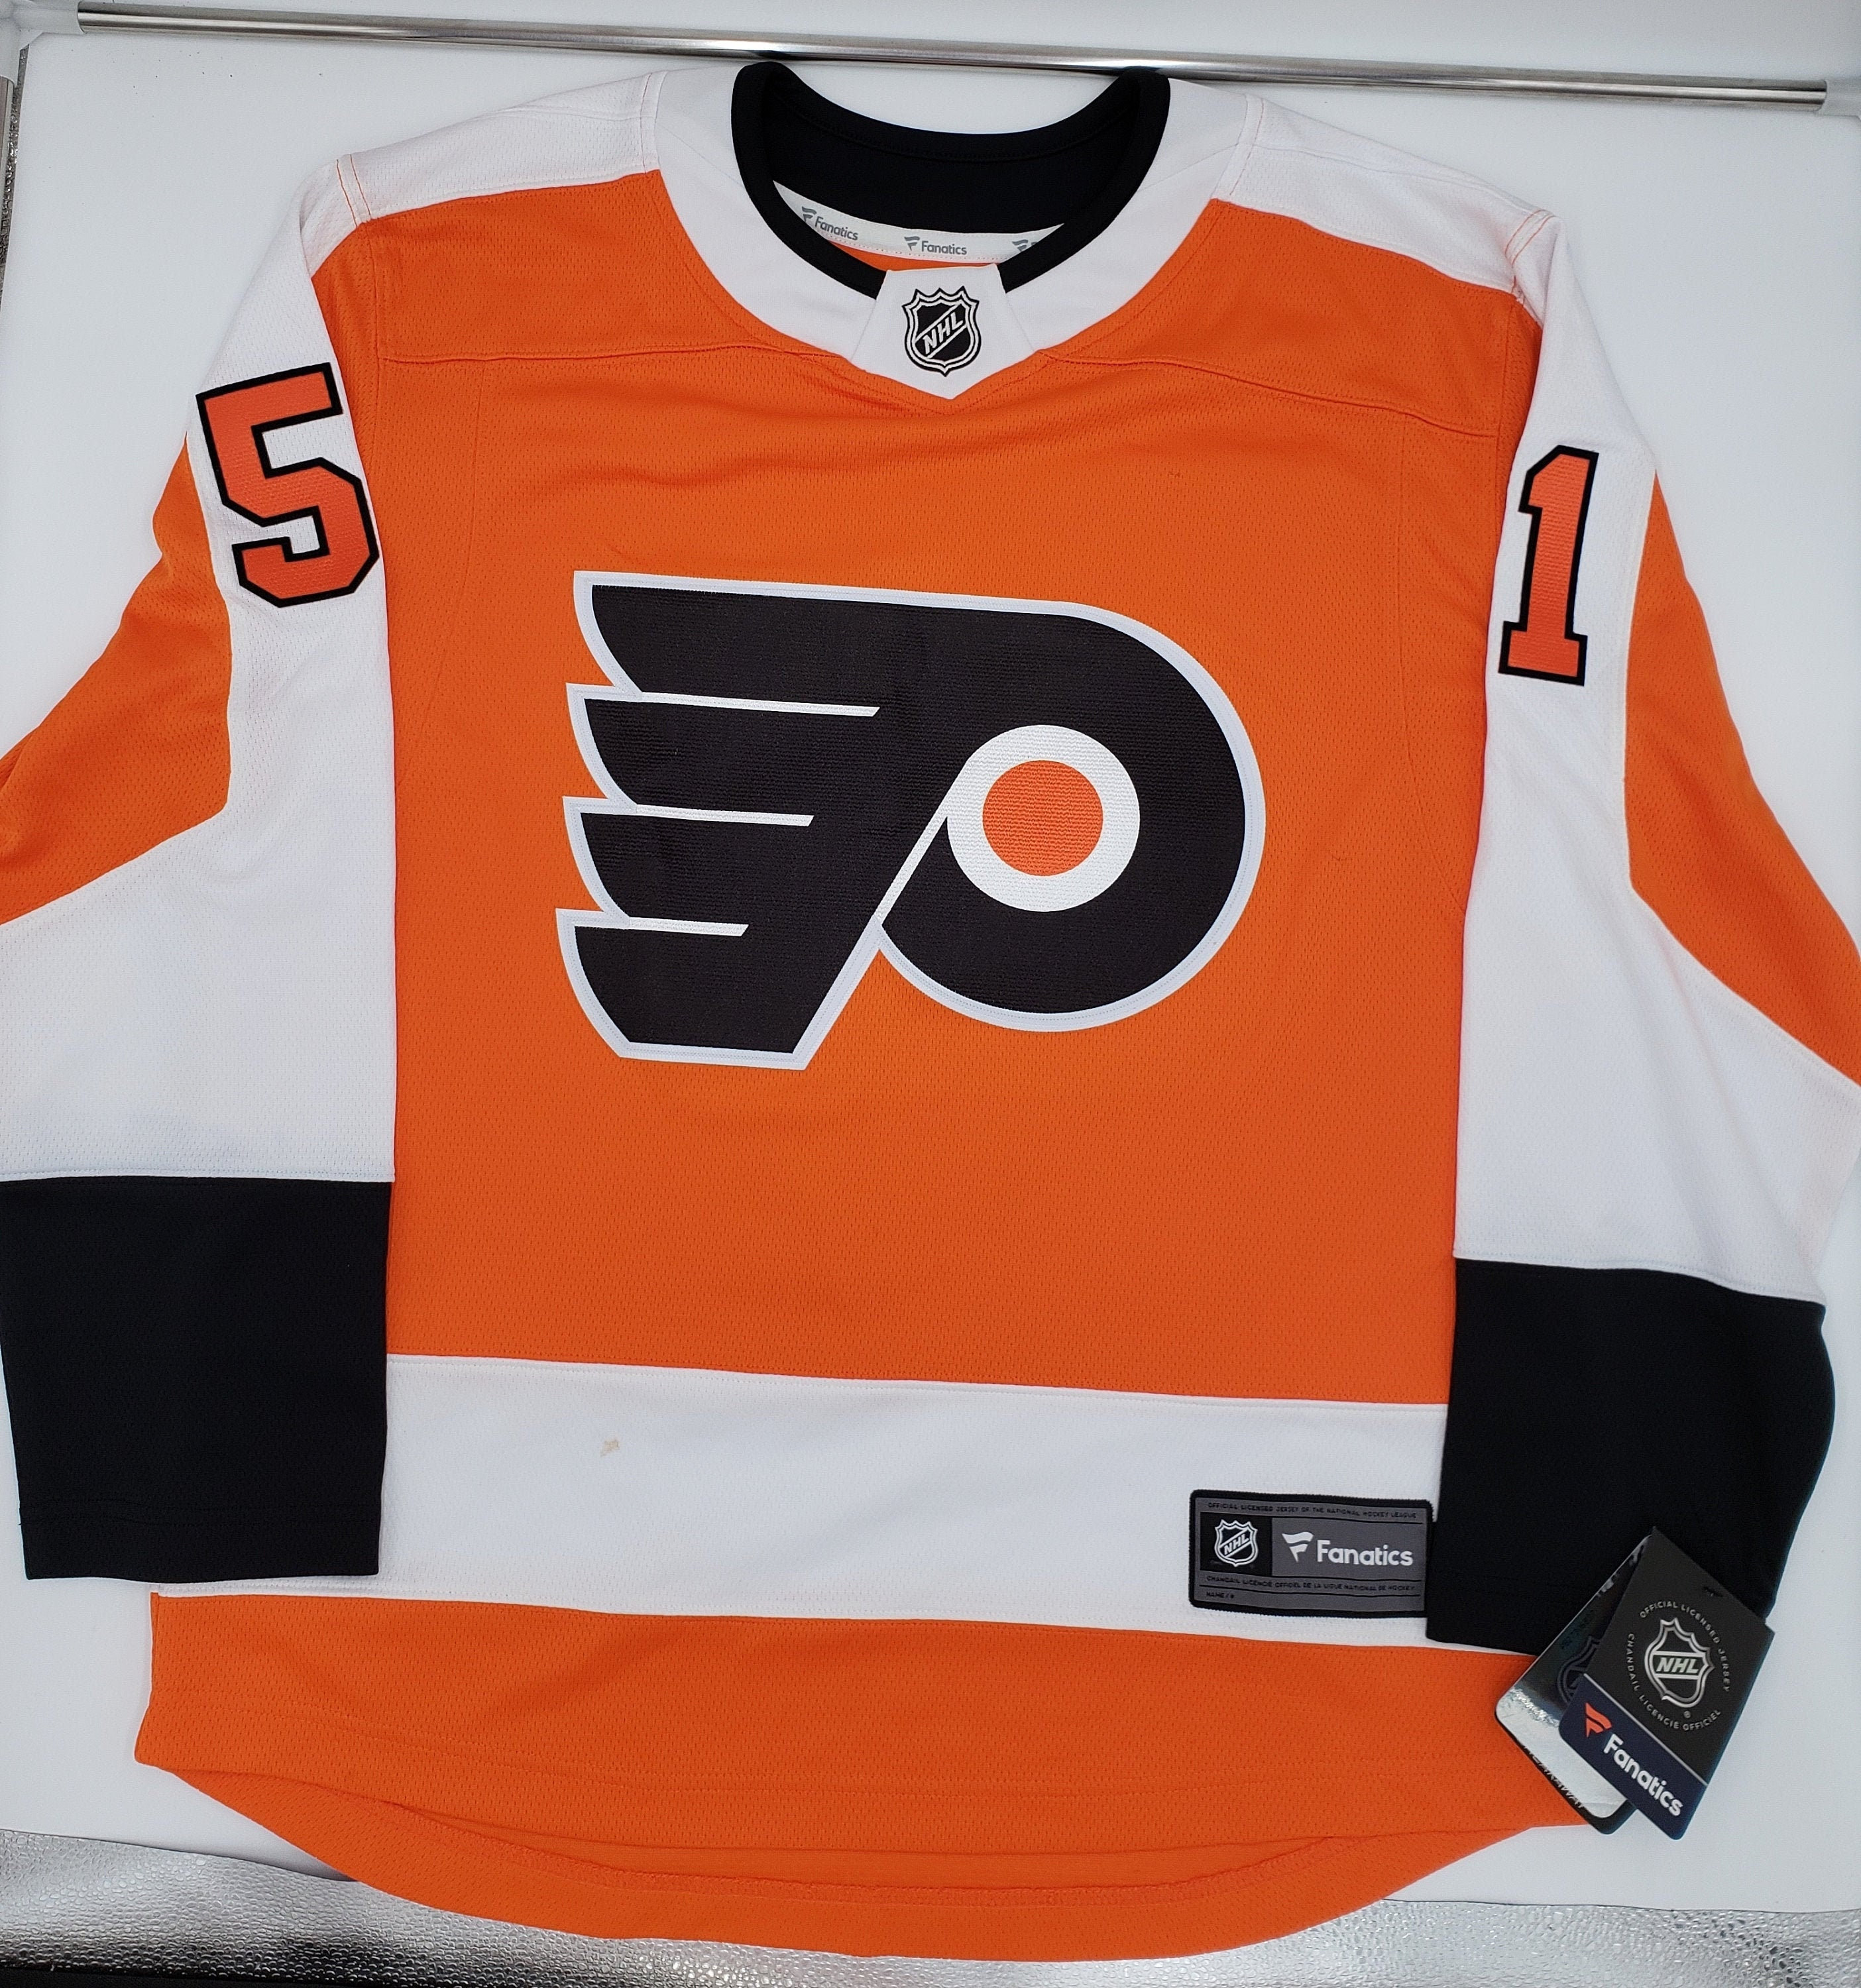 Ladies who own an NHL jersey by the Fanatics brand, how did you find the  sizing to be? : r/hockey